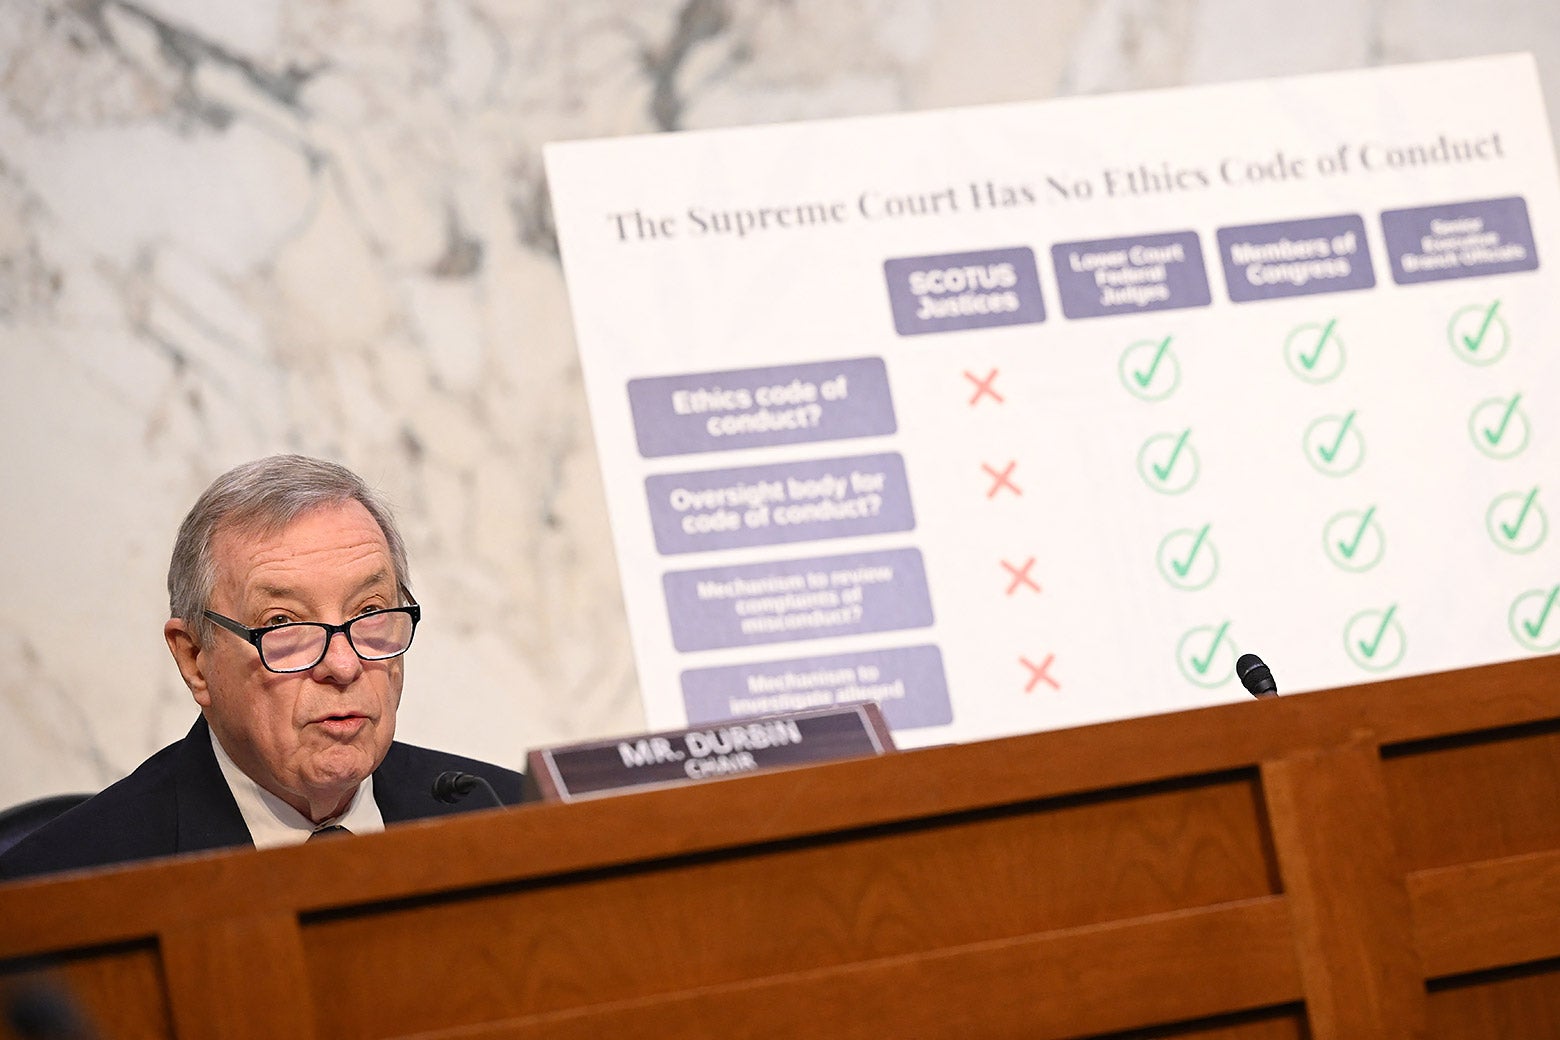 Dick Durban sits at the Senate judiciary podium with a chart about the Supreme Court ethics code of conduct (or lack thereof).